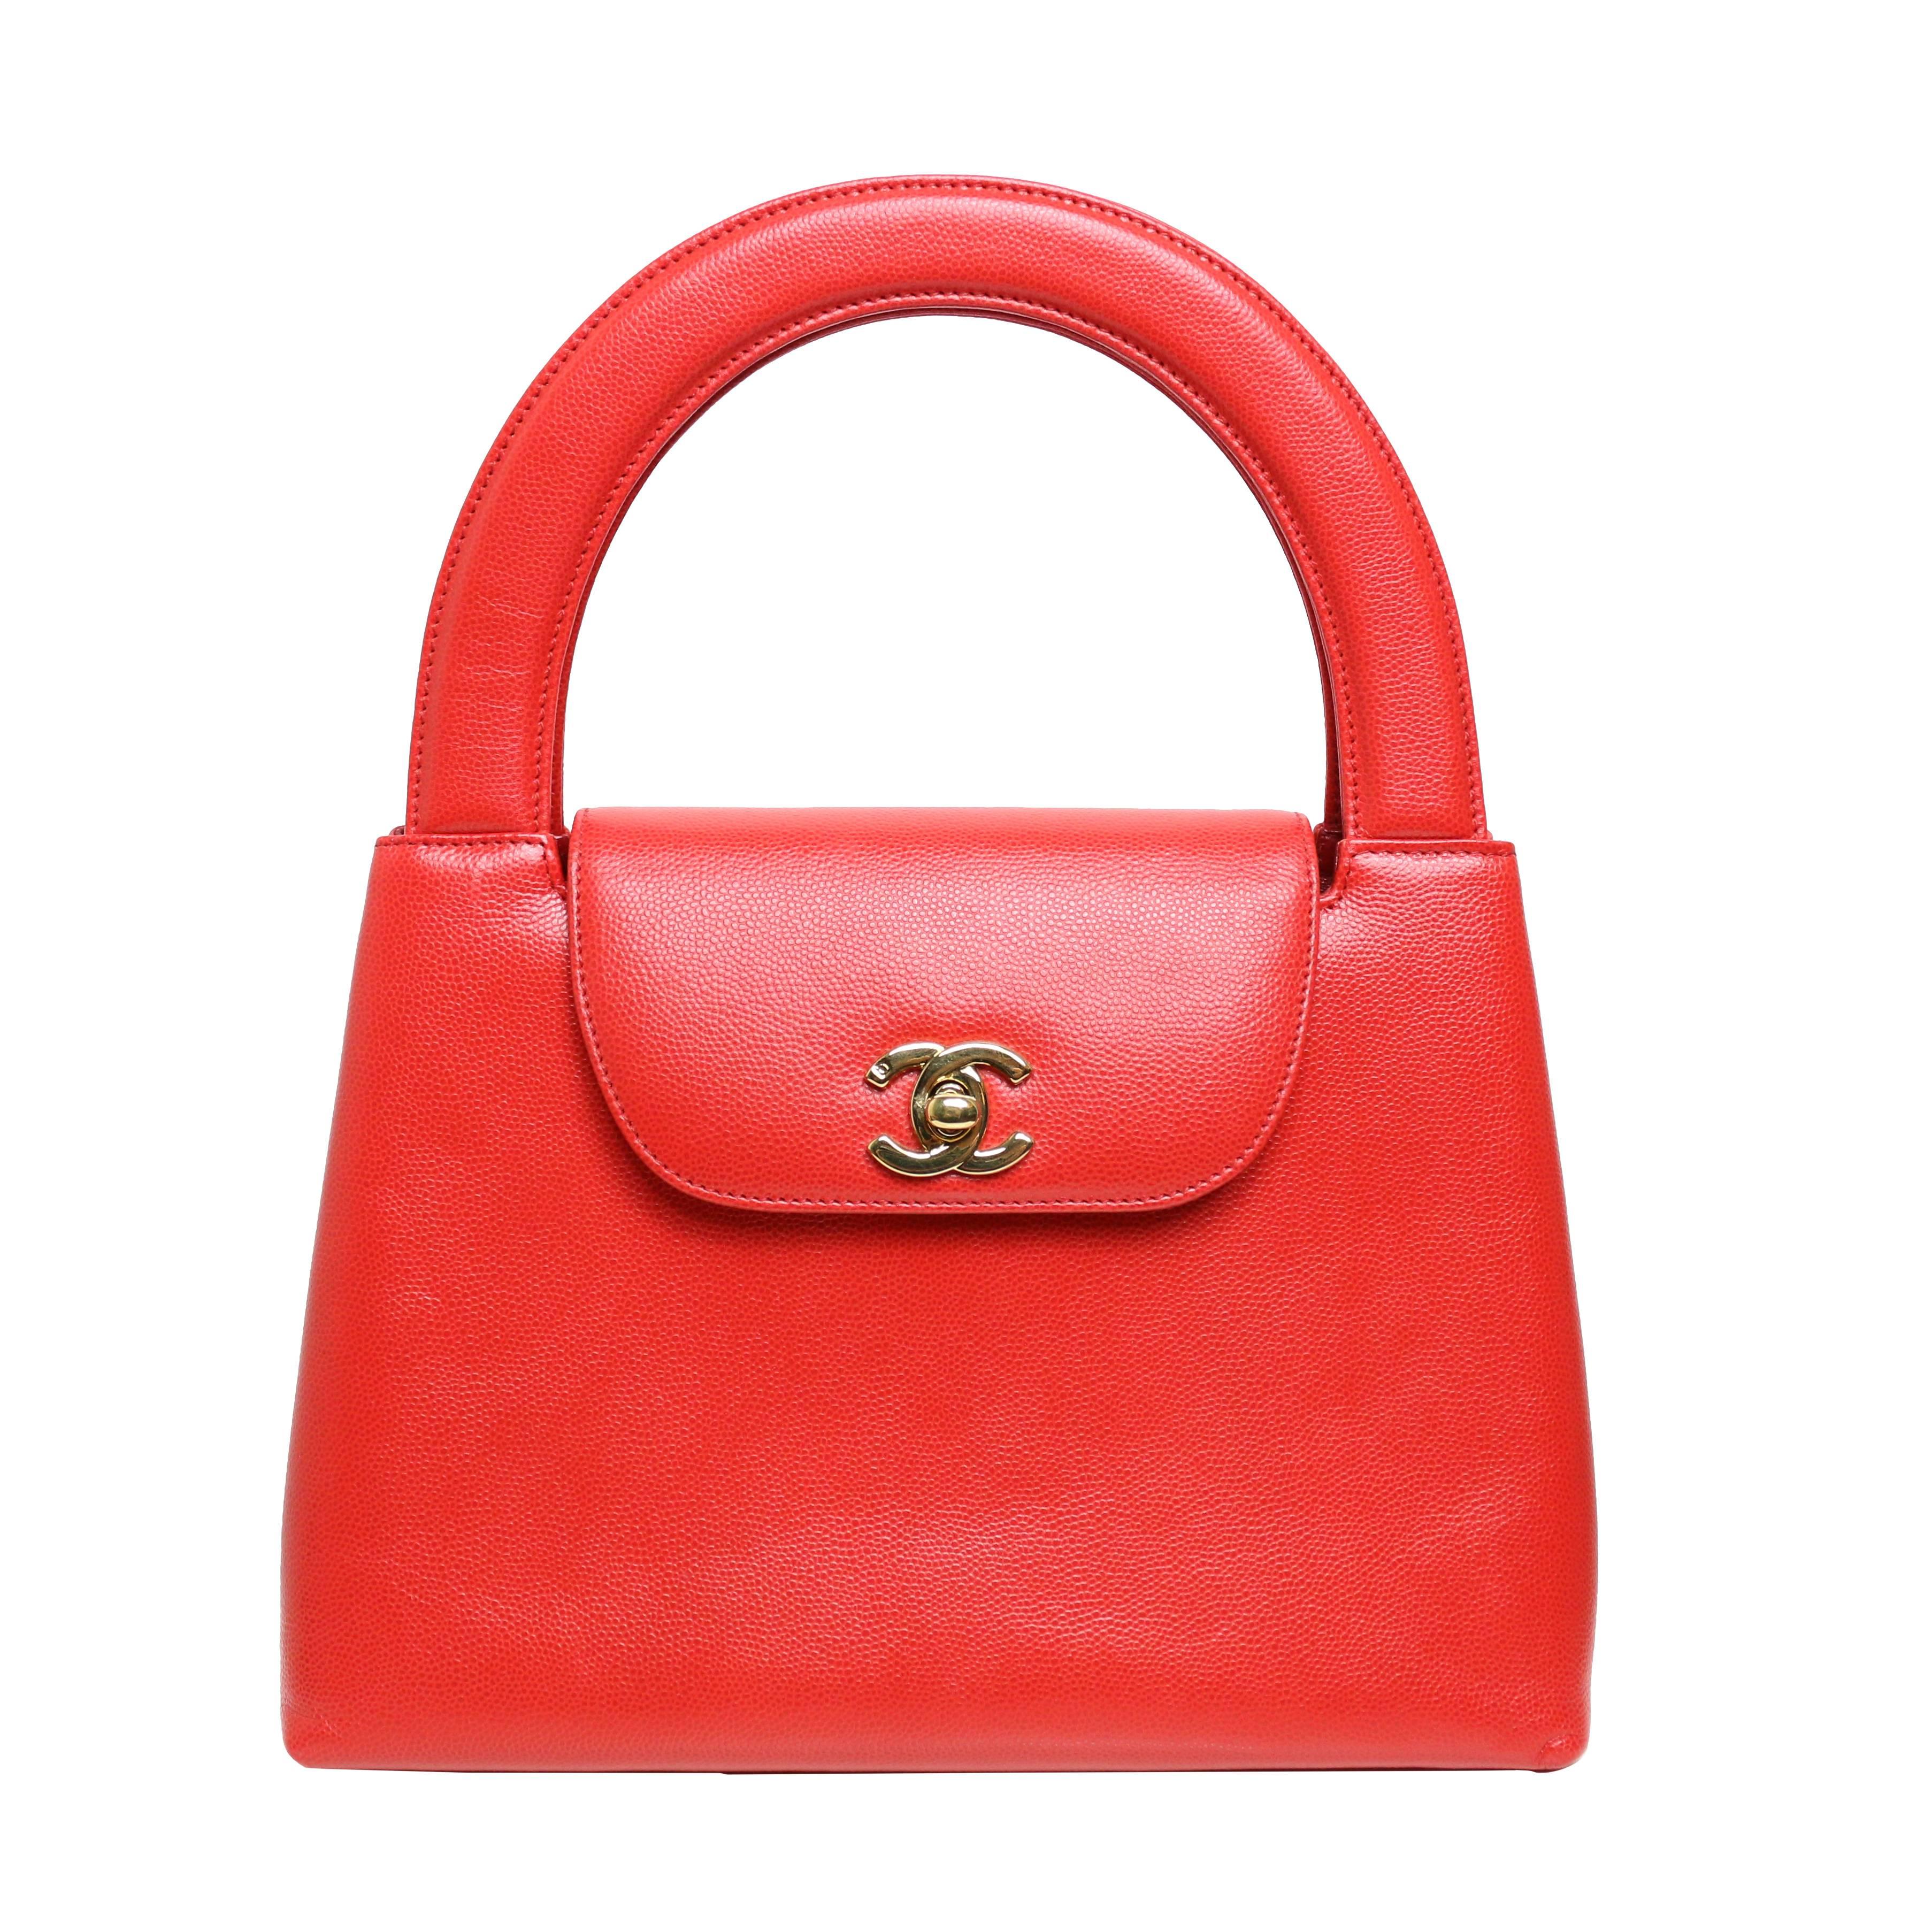 Chanel Classic Red Leather Flap Handbag